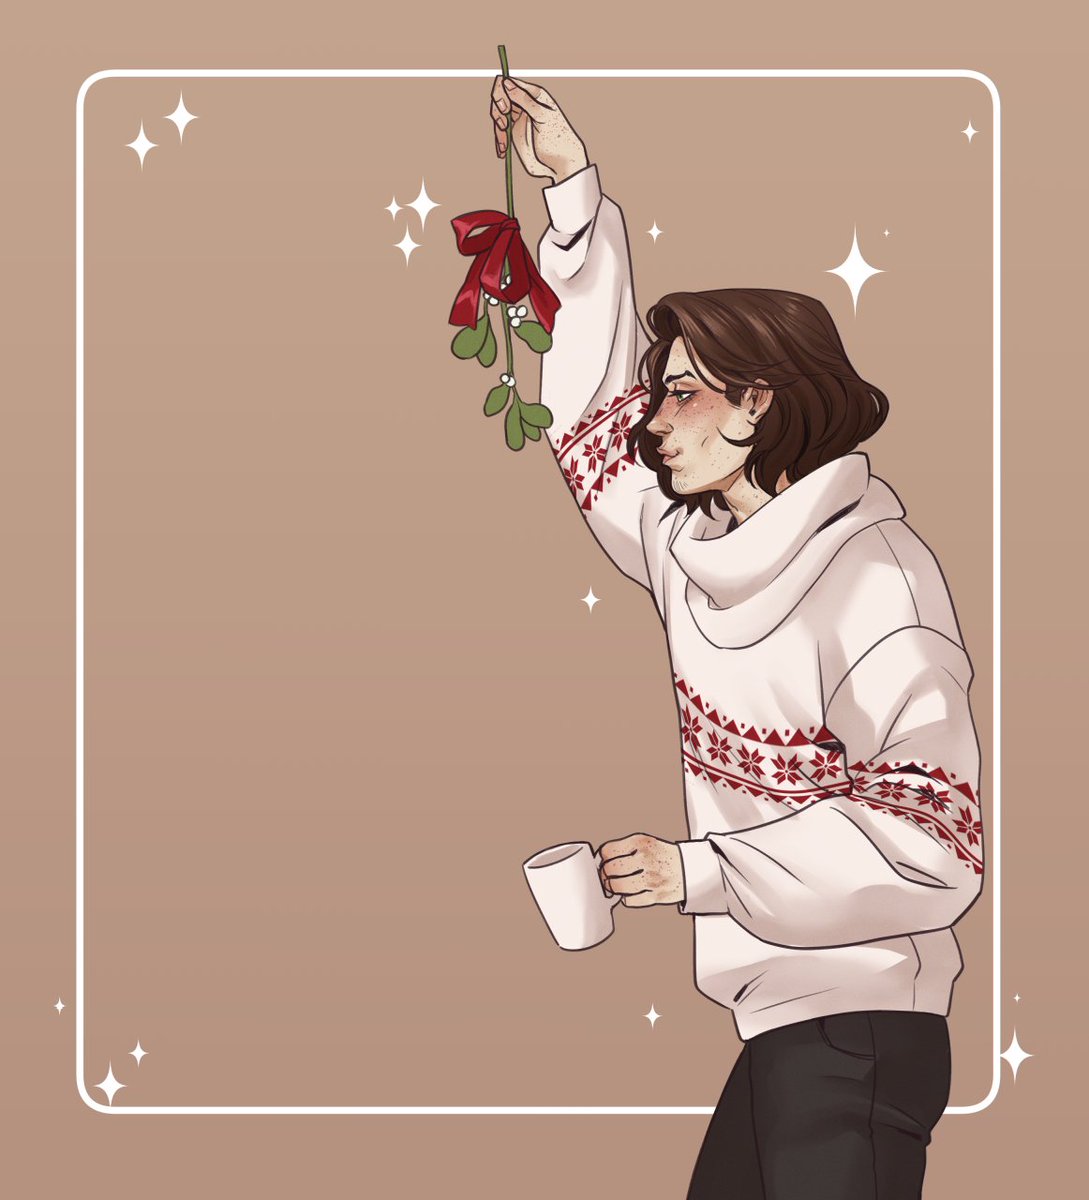 Marcus is comming to steal all your kisses #ocmistletoe